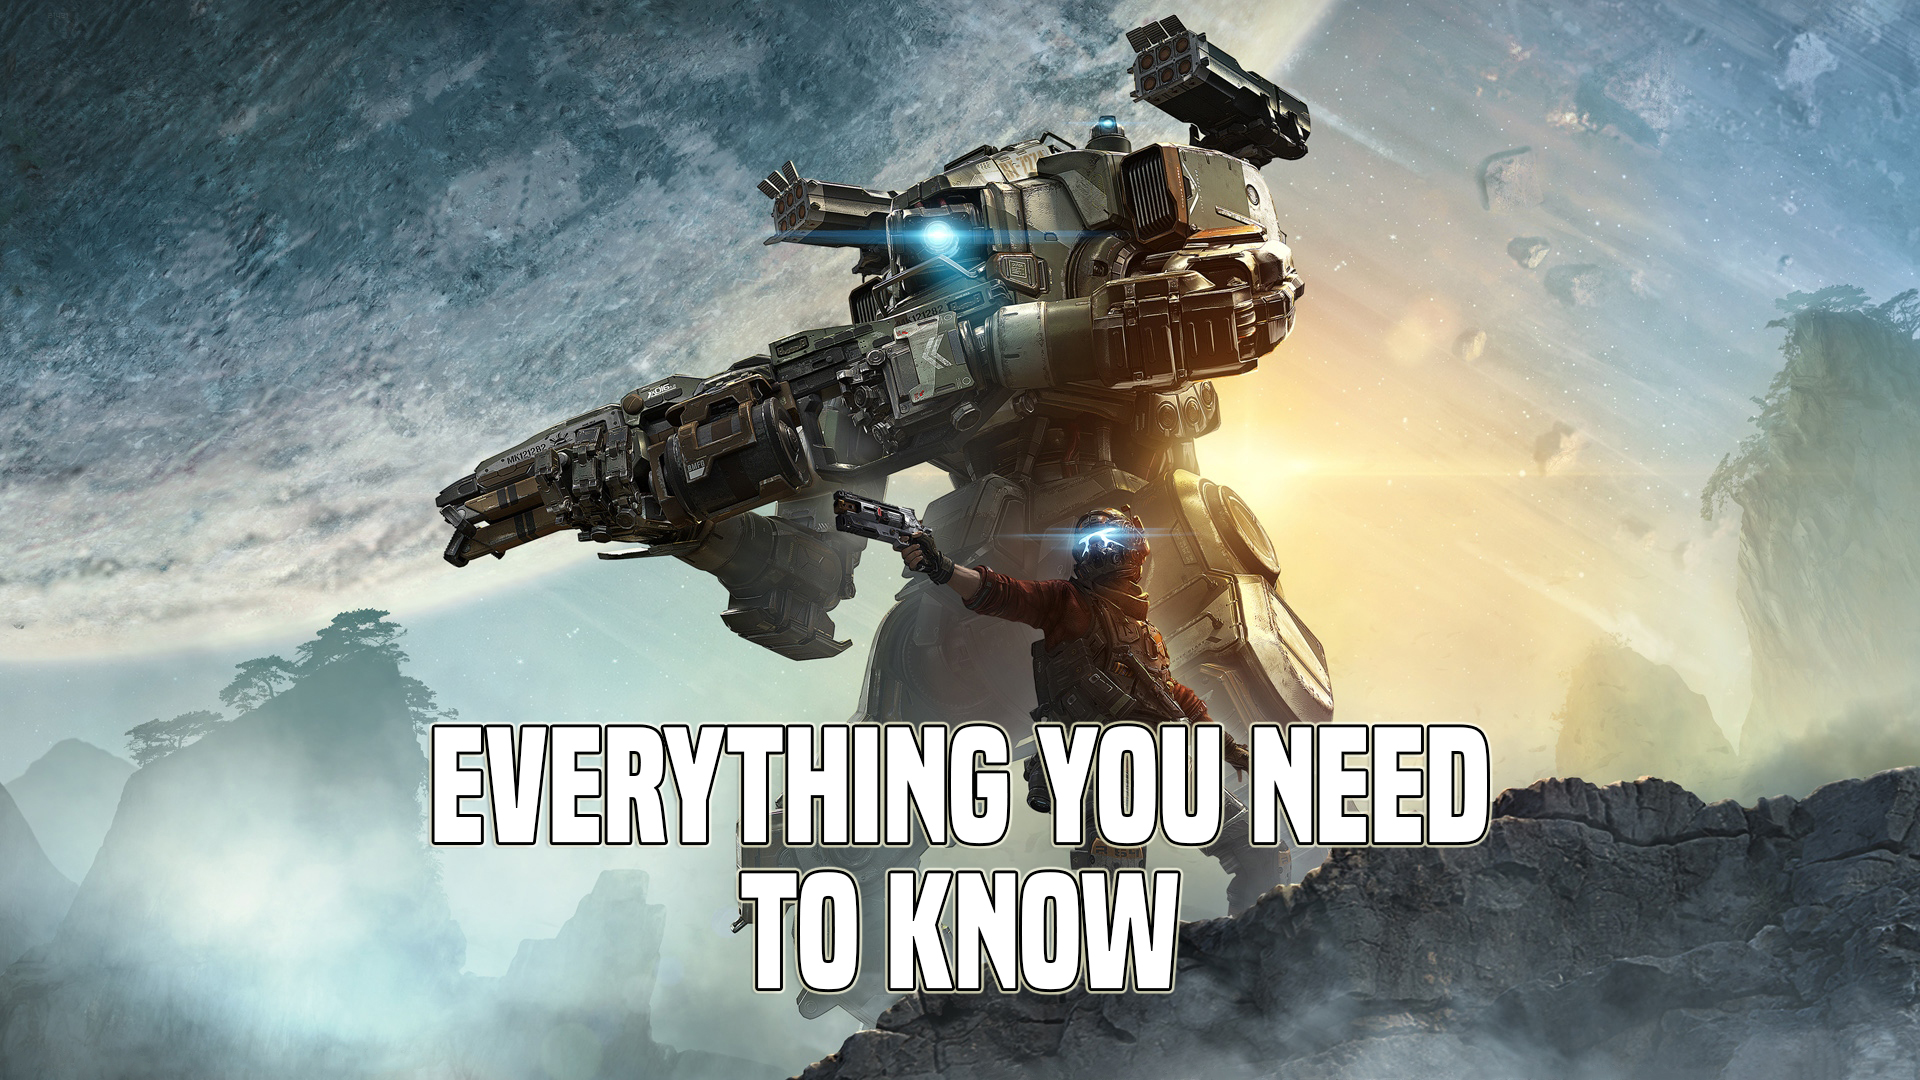 Titanfall 2 - Everything You Need to Know